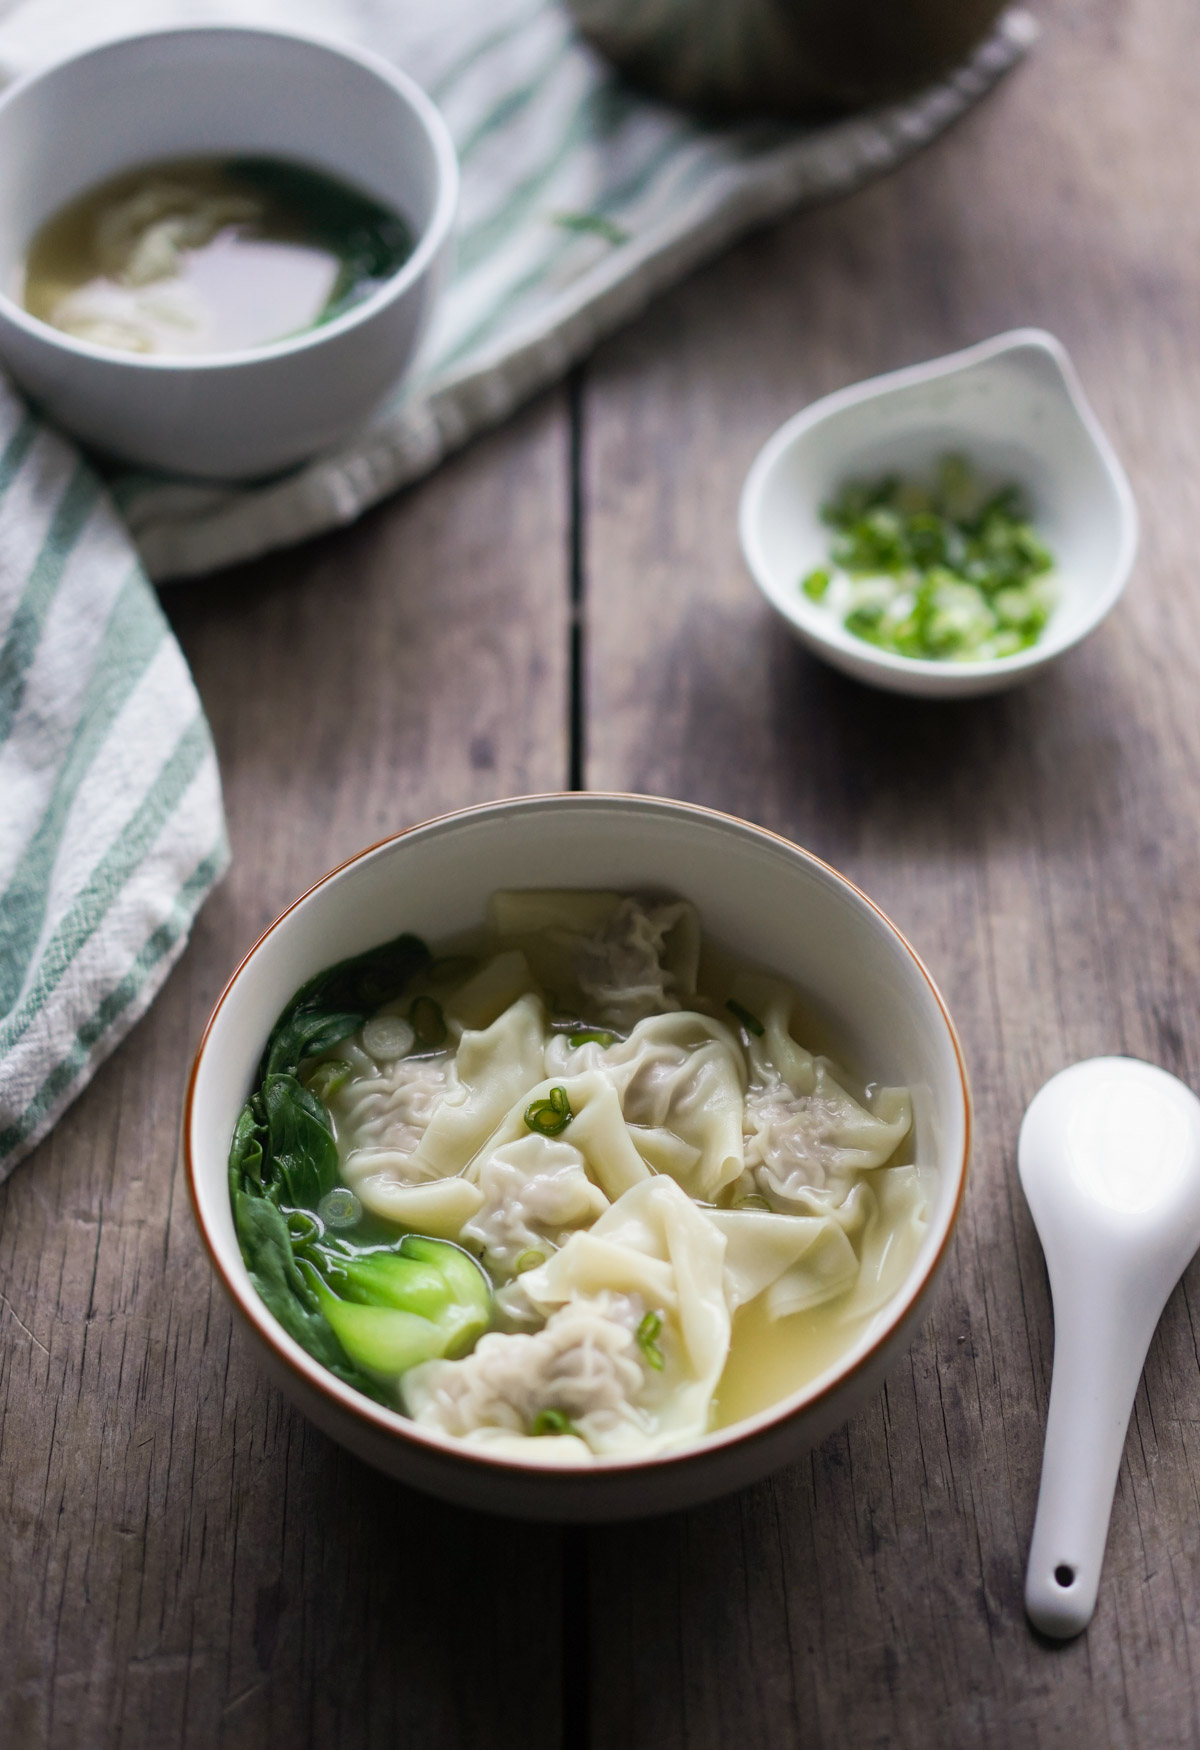 a comforting bowl of wonton soup and bok choy